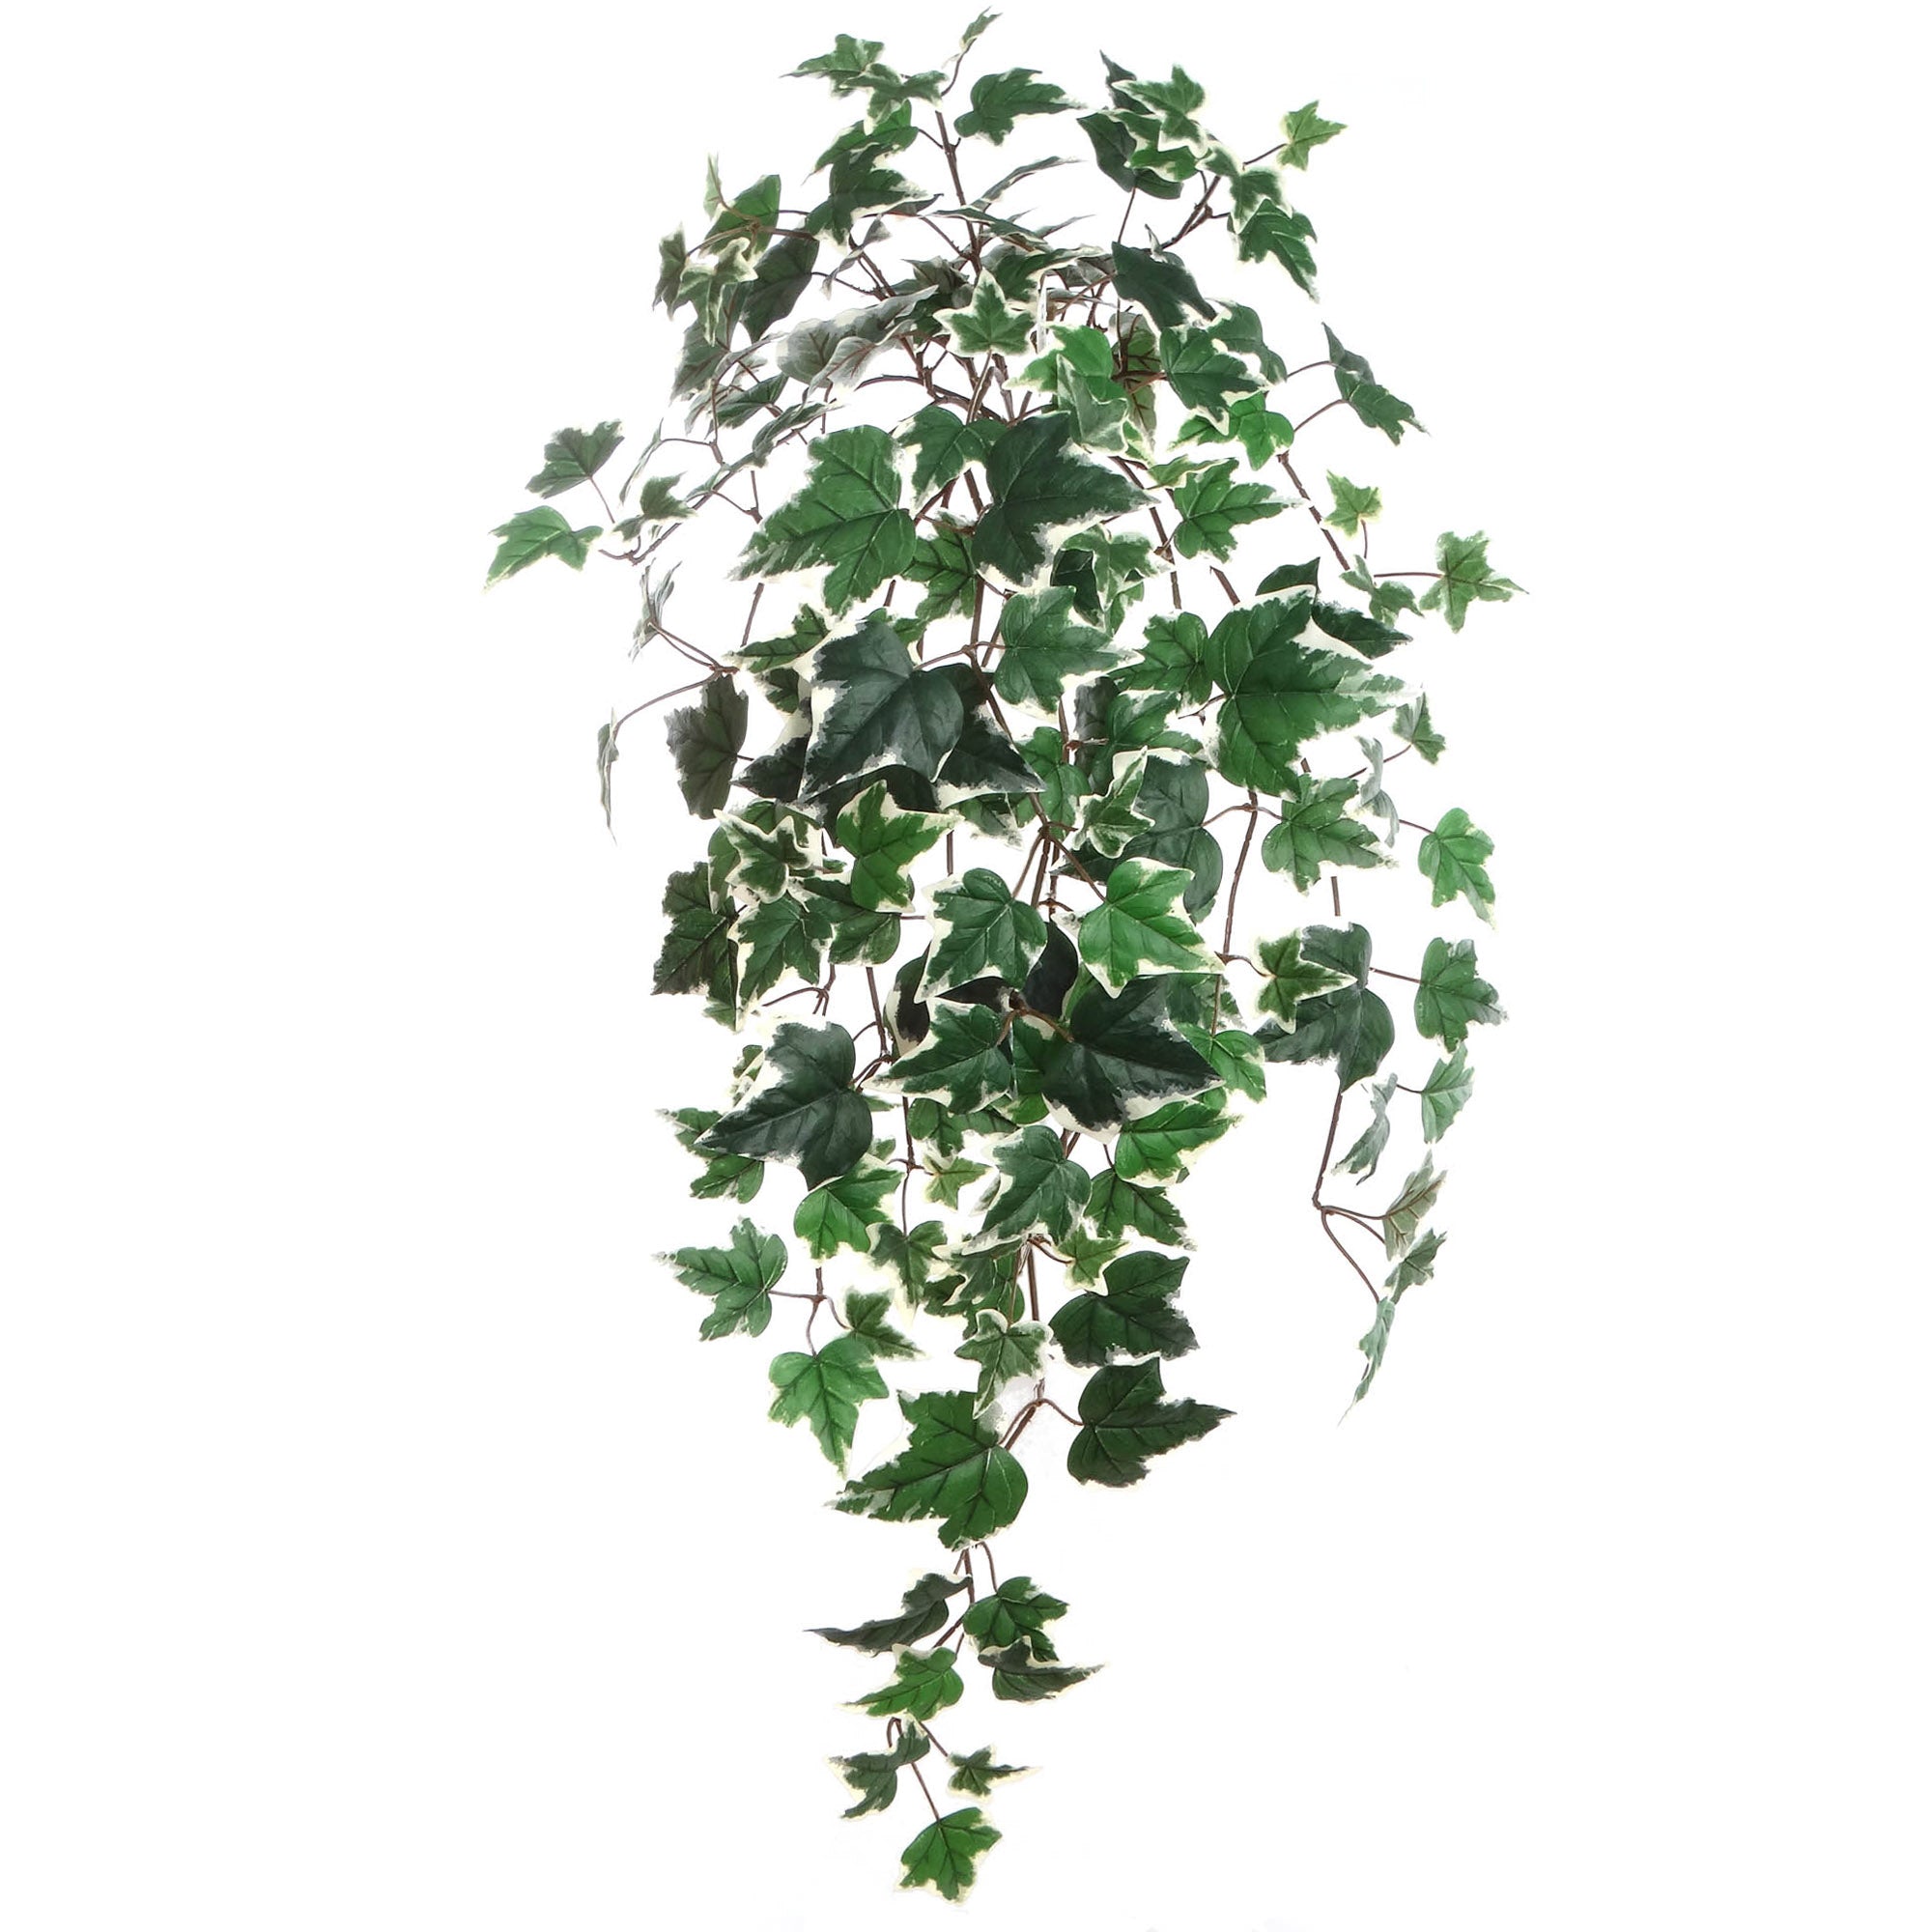 Vibrant 33" Variegated English Ivy Bush 157L - Lifelike Artificial Greenery for Home Decor, Wedding Arrangements, and DIY Crafts